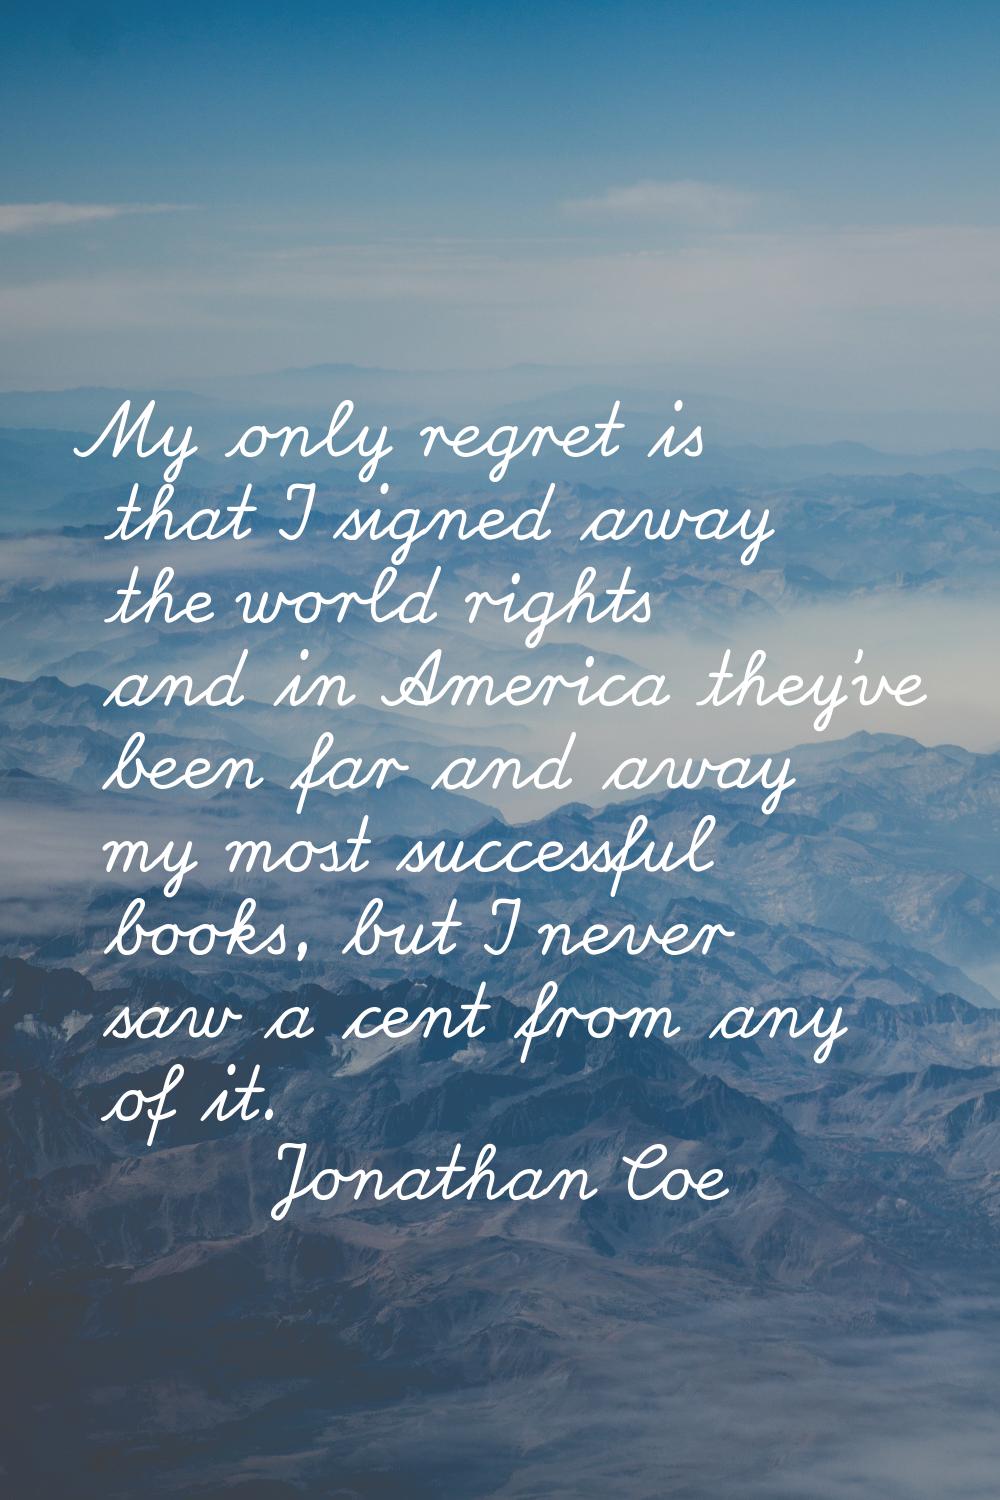 My only regret is that I signed away the world rights and in America they've been far and away my m